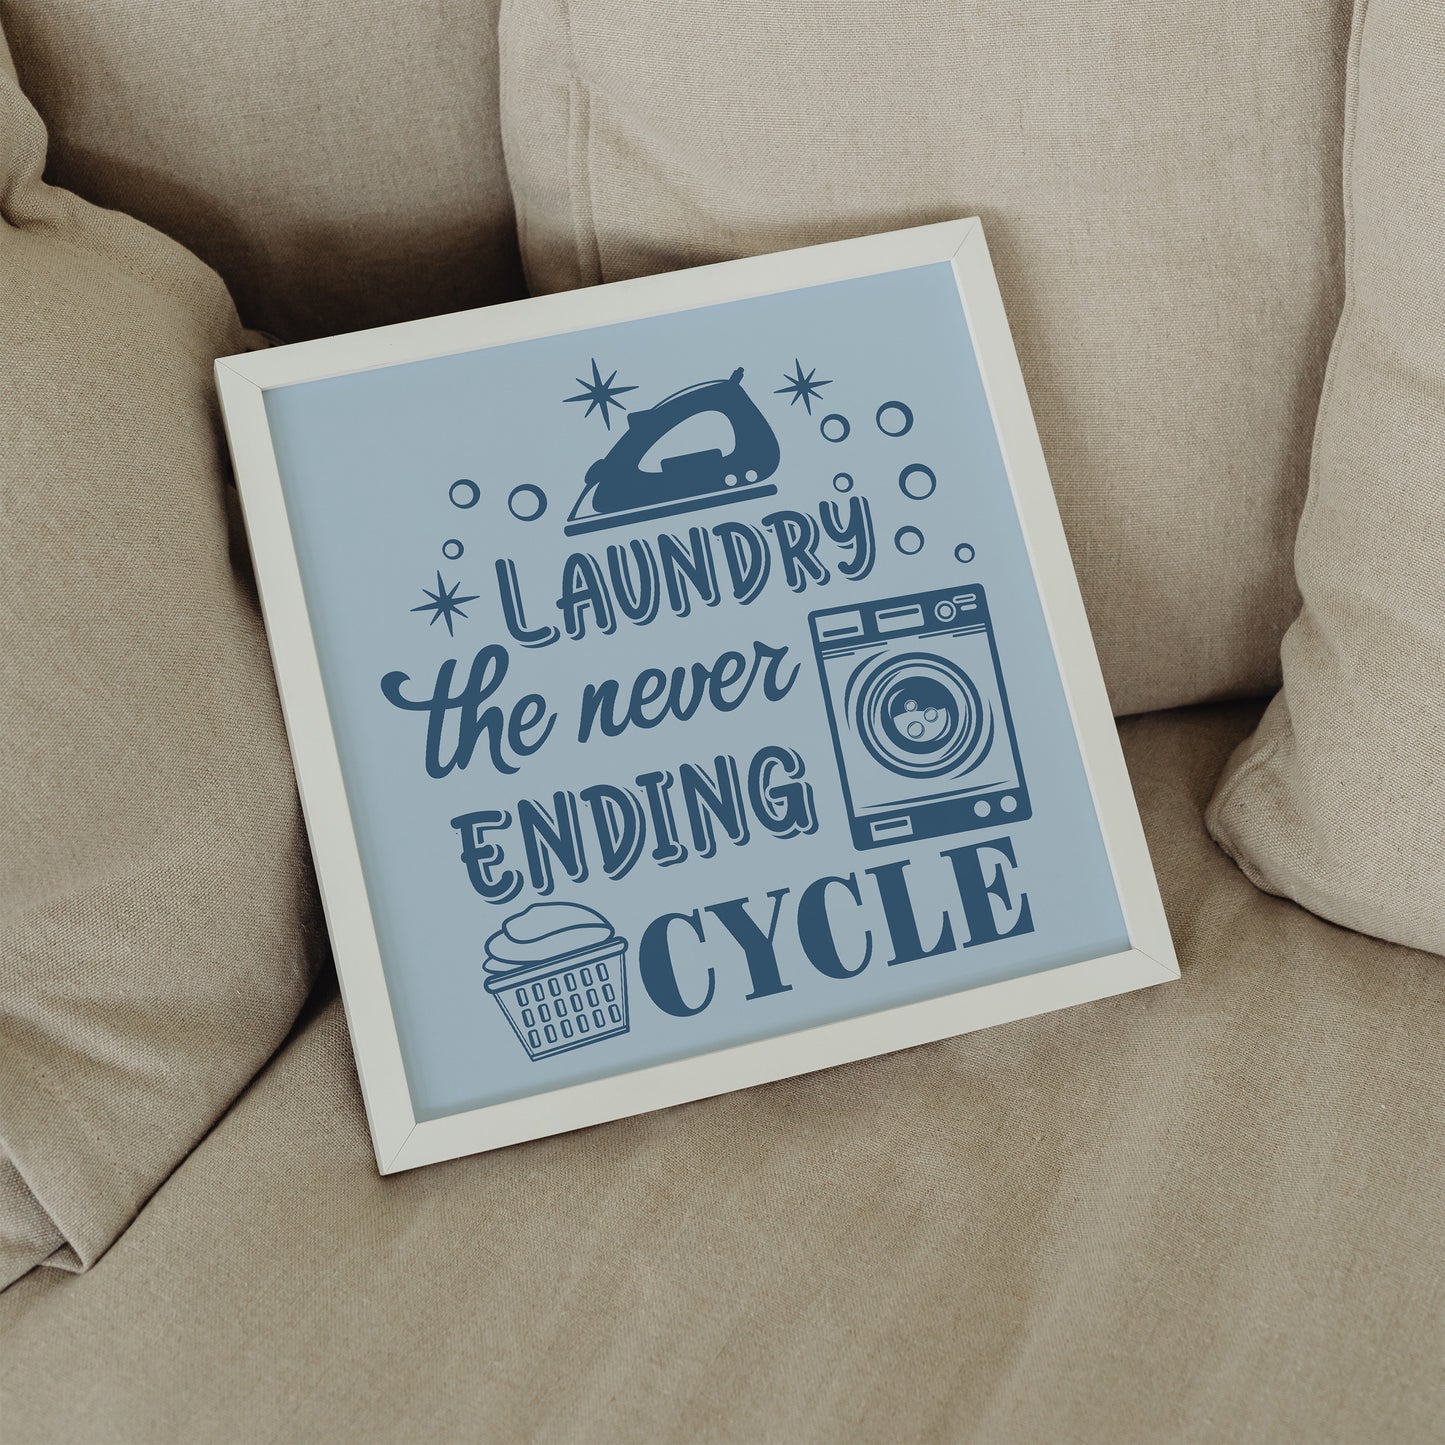 Funny Laundry Room Square Print